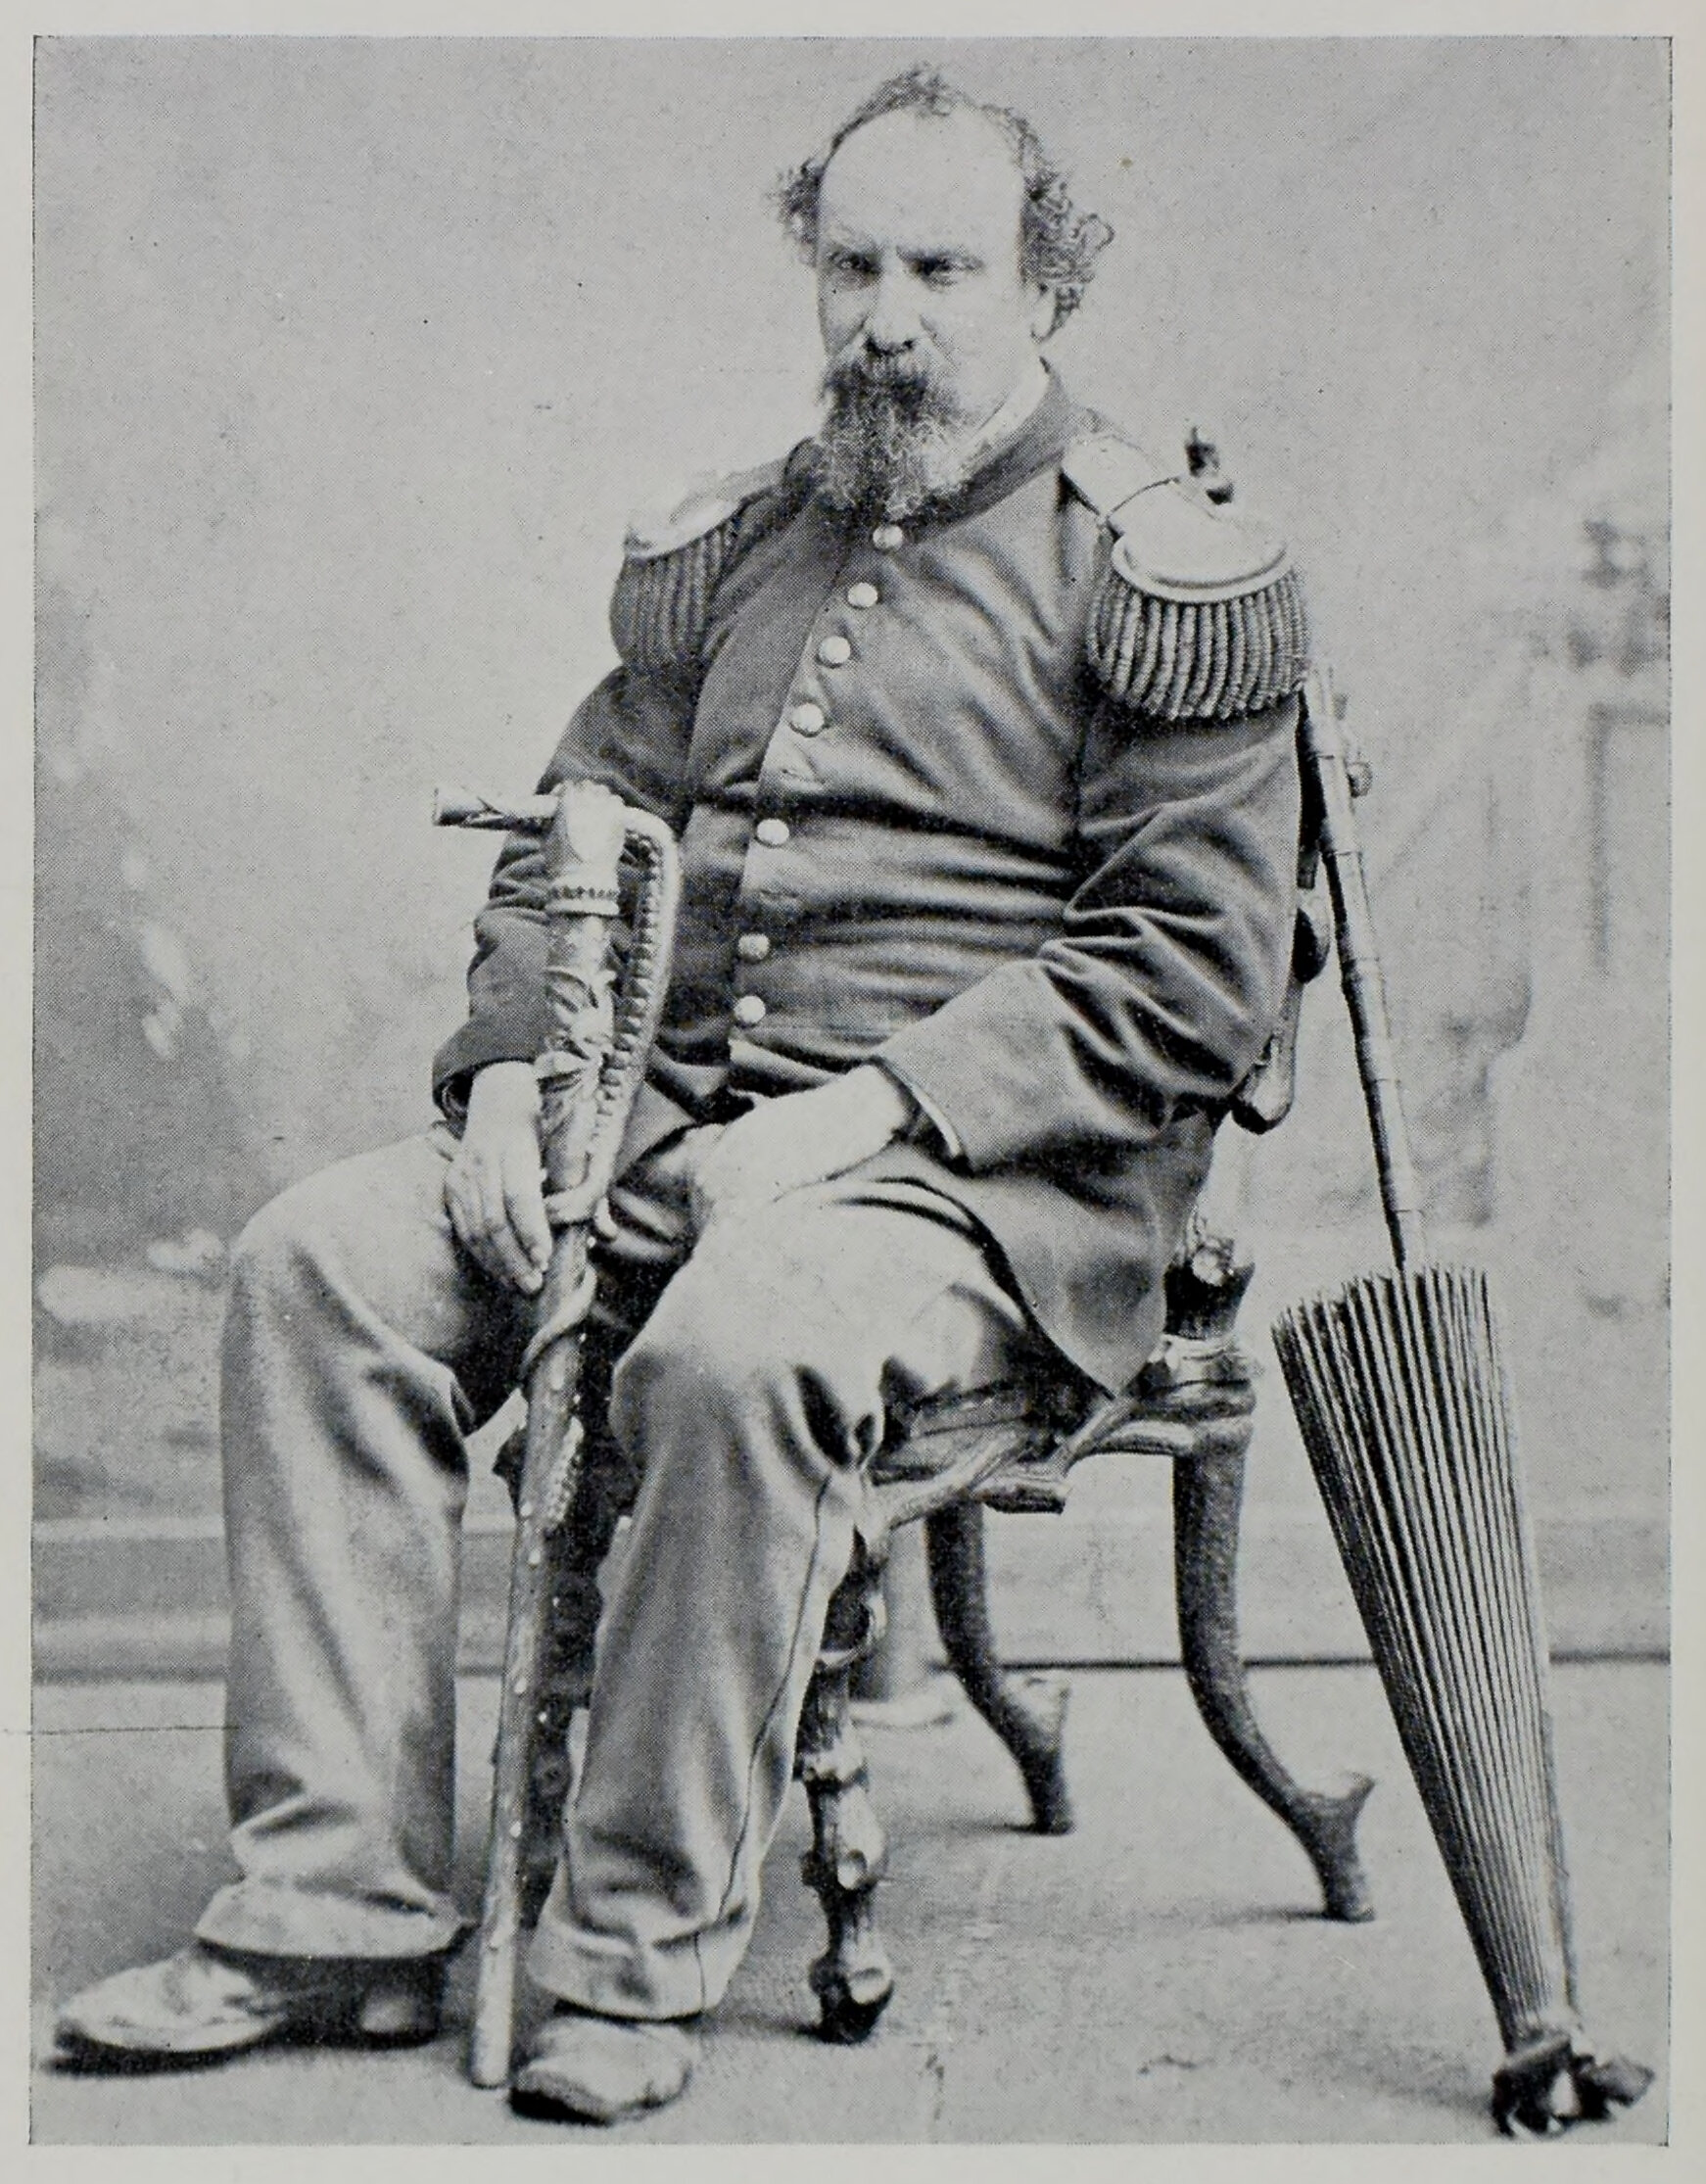 Emperor_Norton_photo_in_Fred_R_Marckhoff_article_Calcoin_News_v15n3_1961_p90.jpg